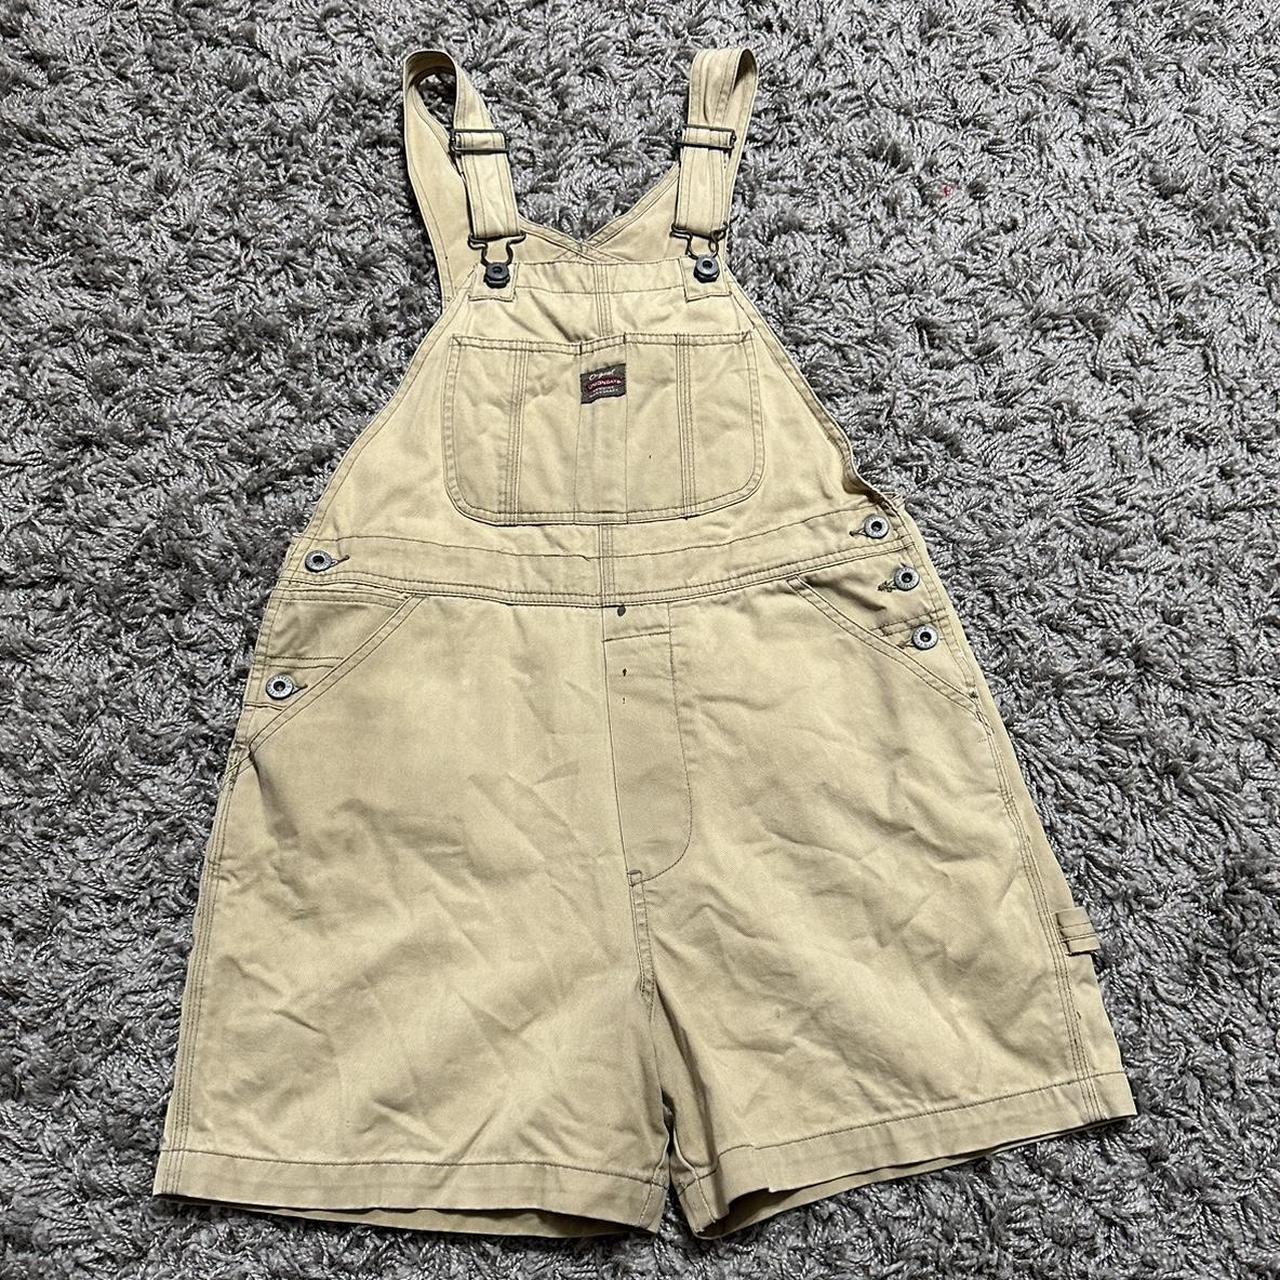 item listed by ezvintagefinds